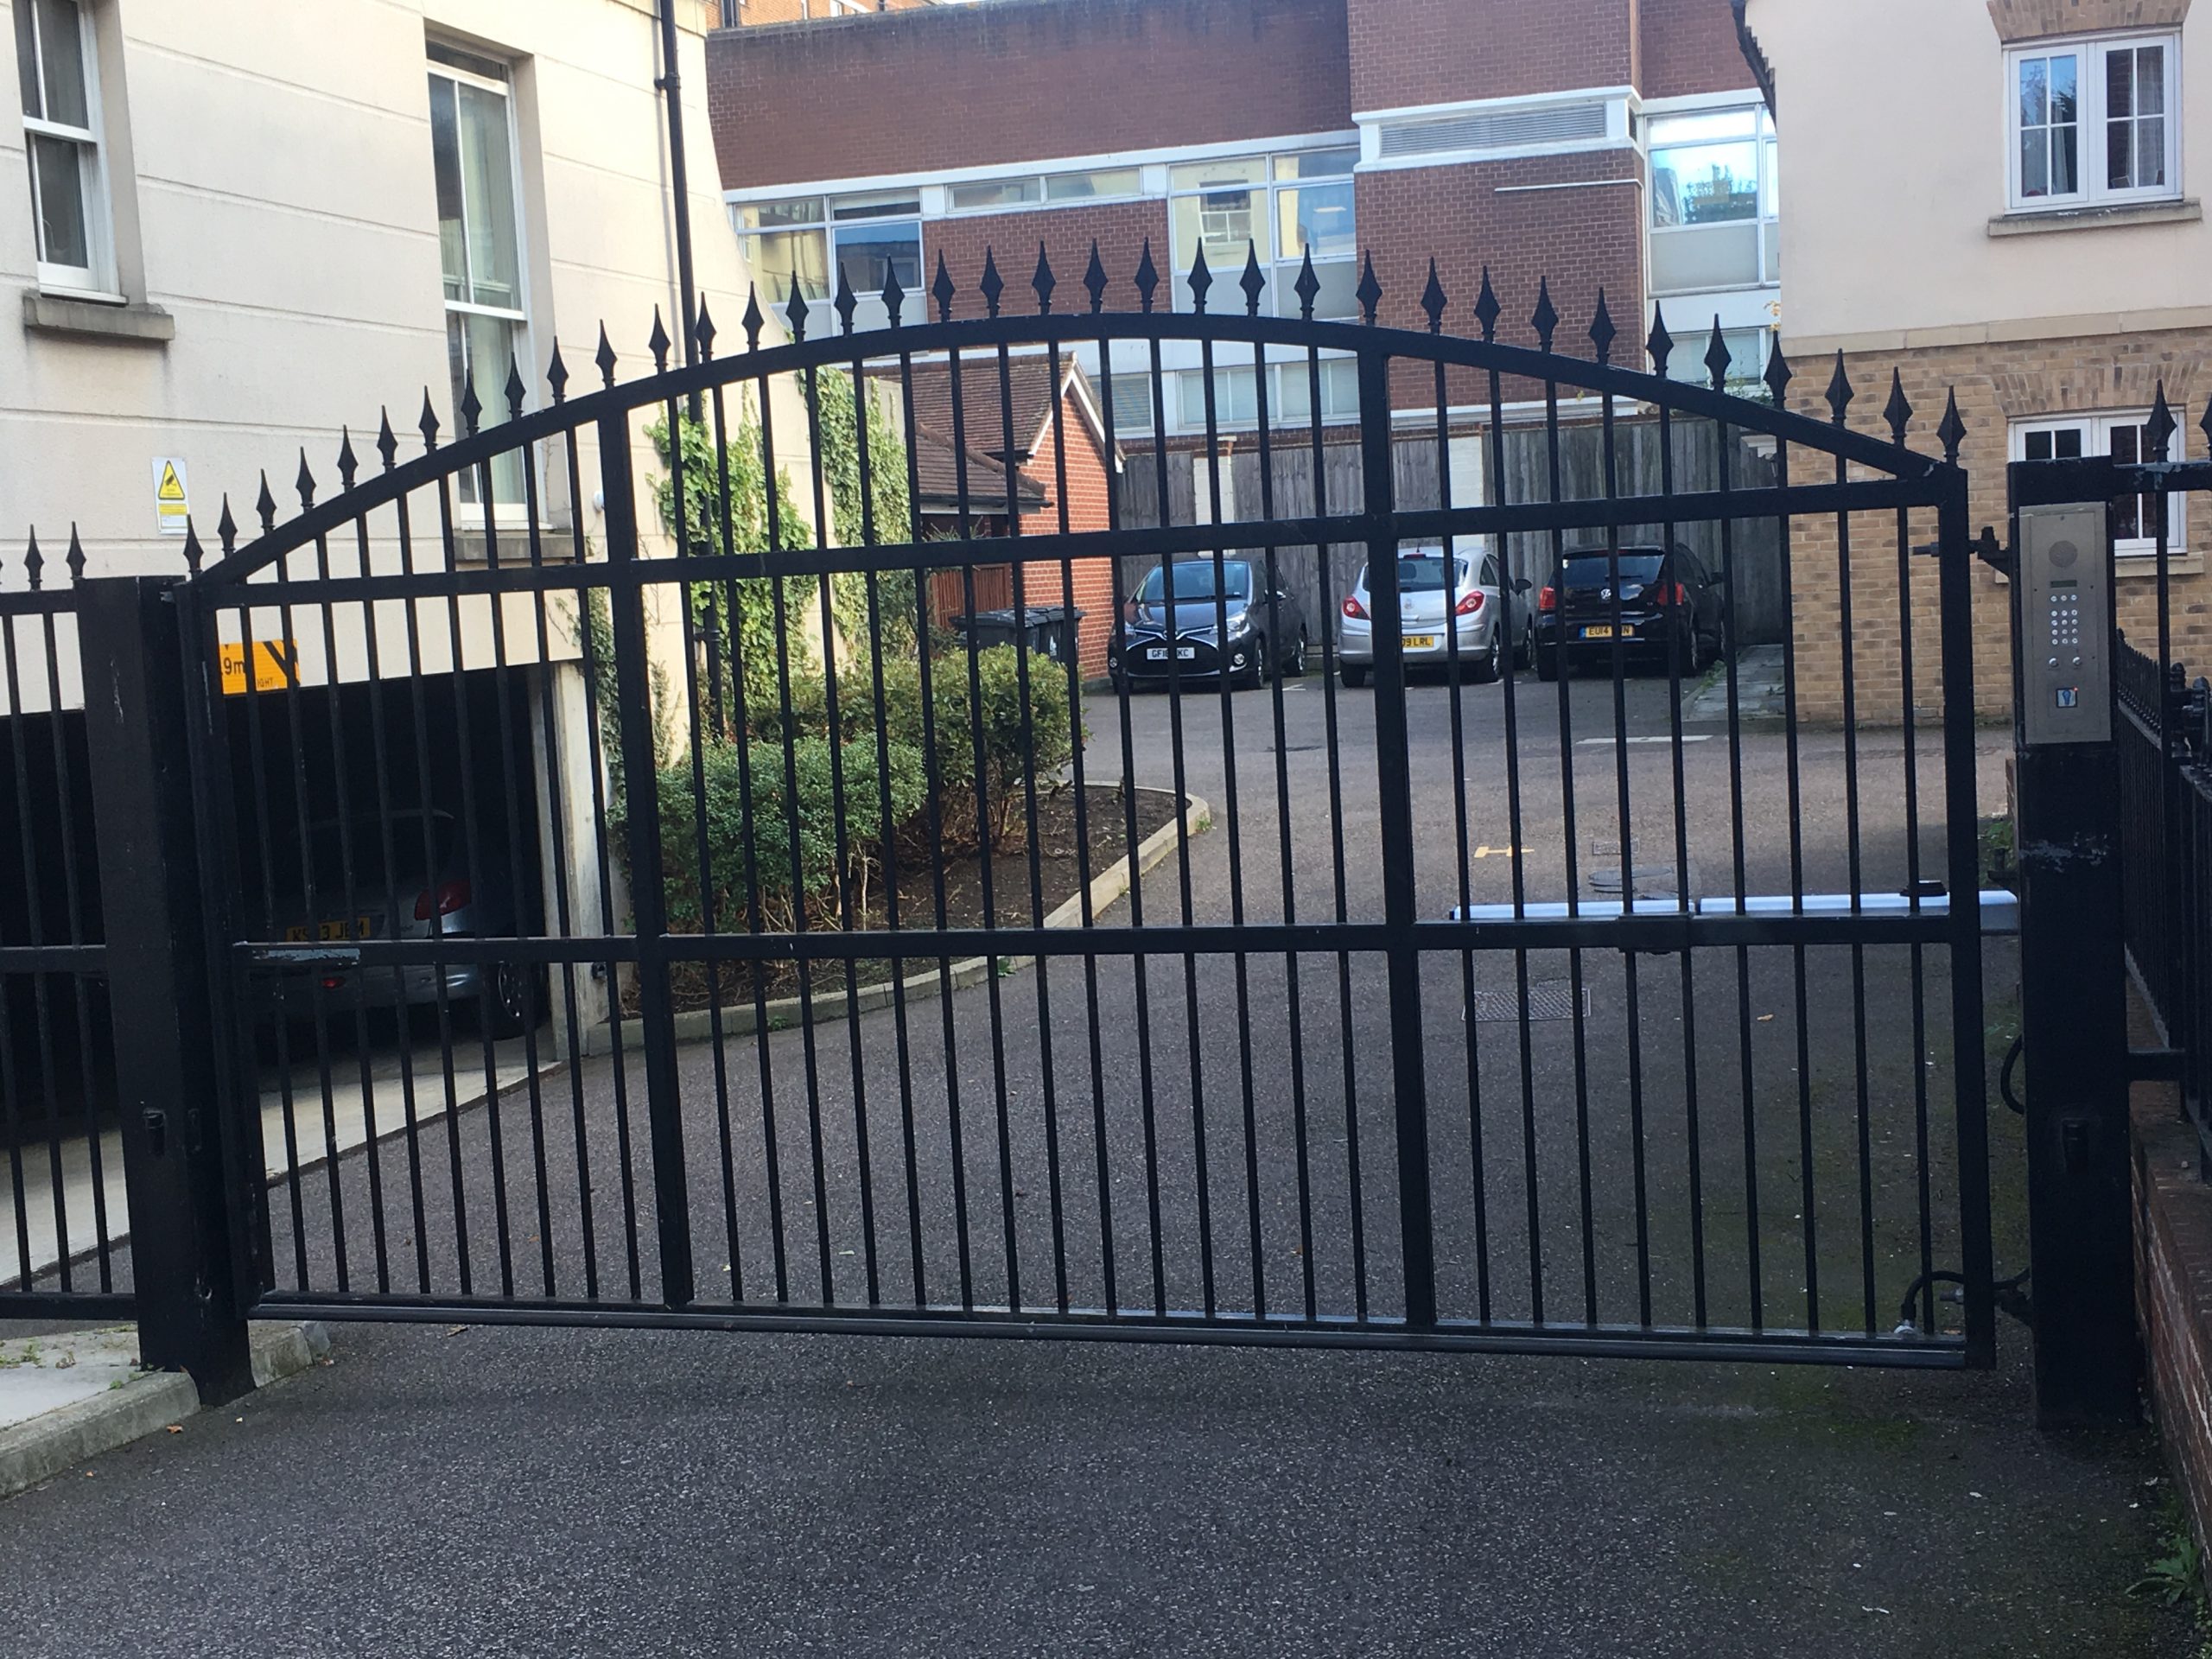 No hinge protection on electric gate